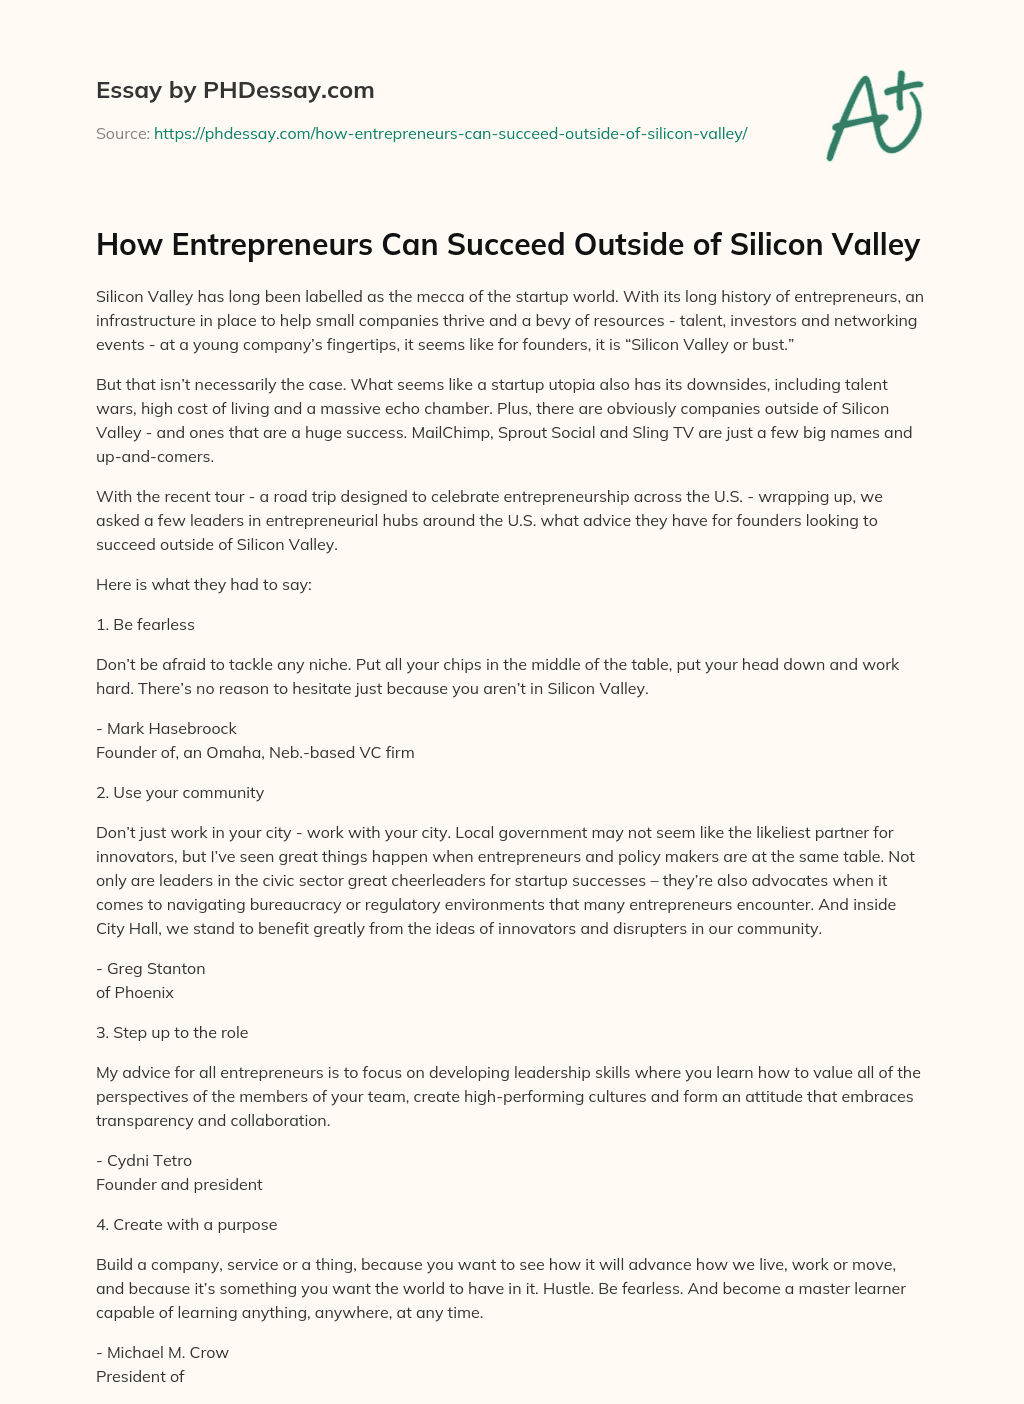 How Entrepreneurs Can Succeed Outside of Silicon Valley essay